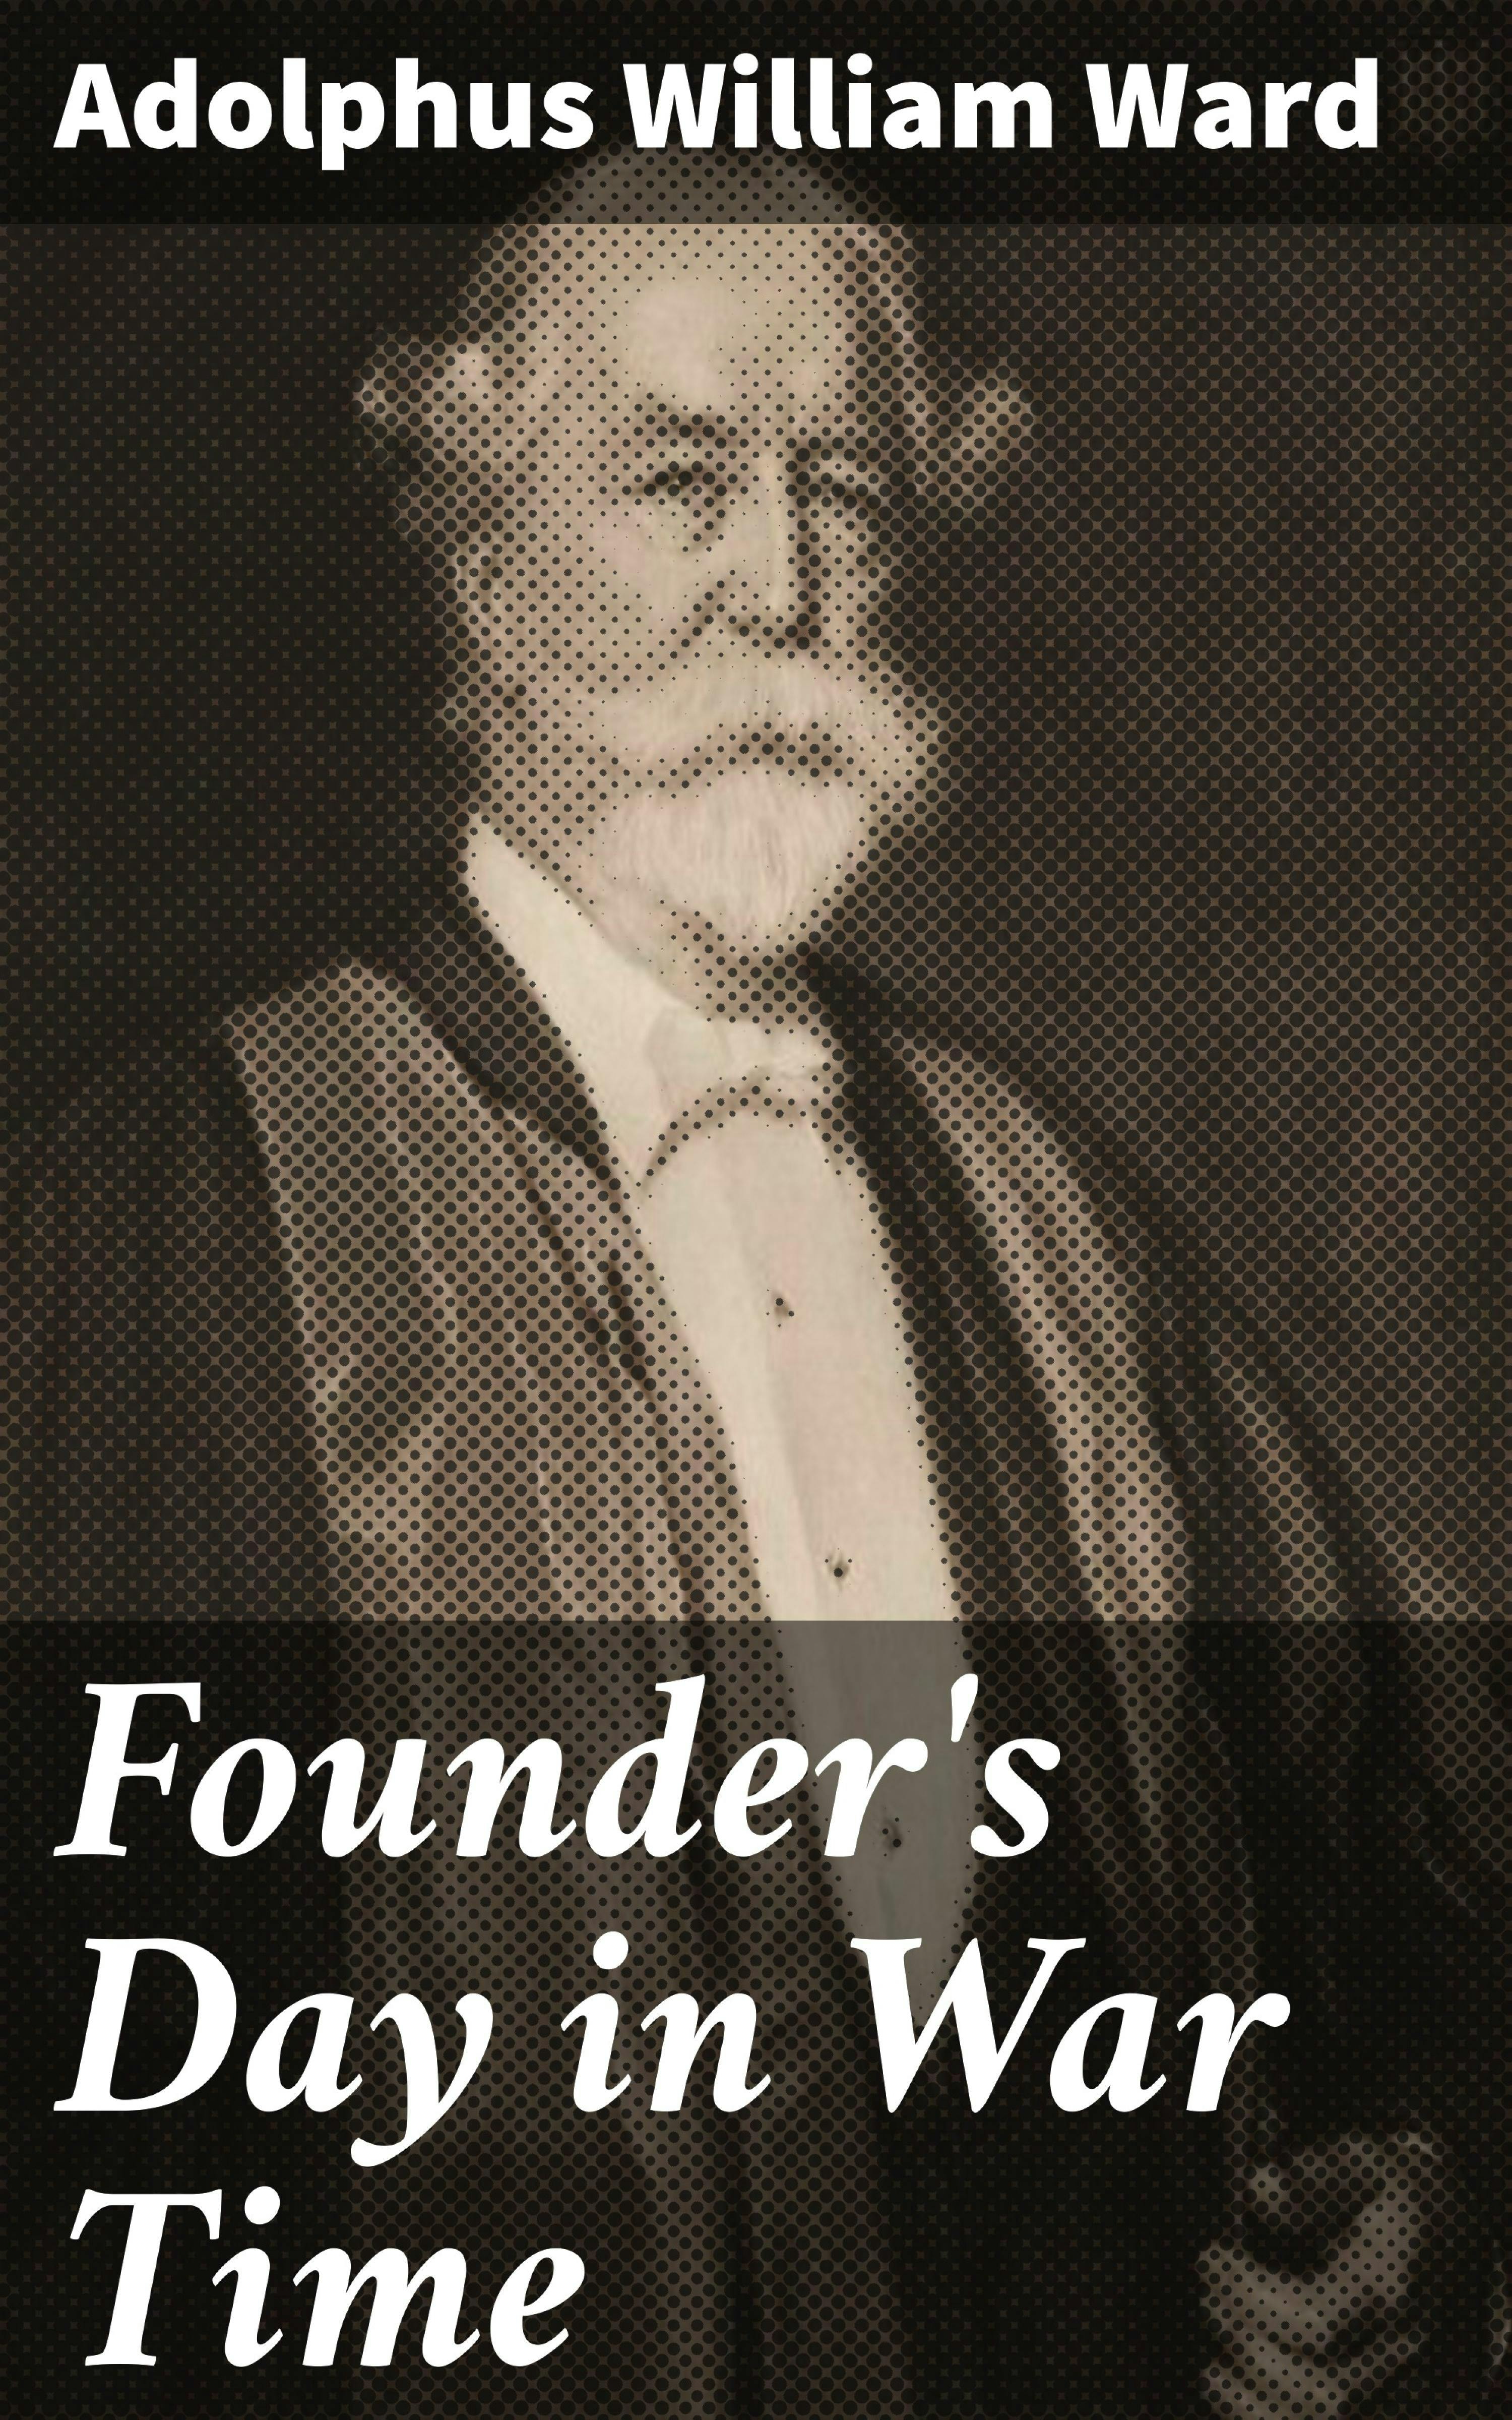 Founder's Day in War Time - Adolphus William Ward